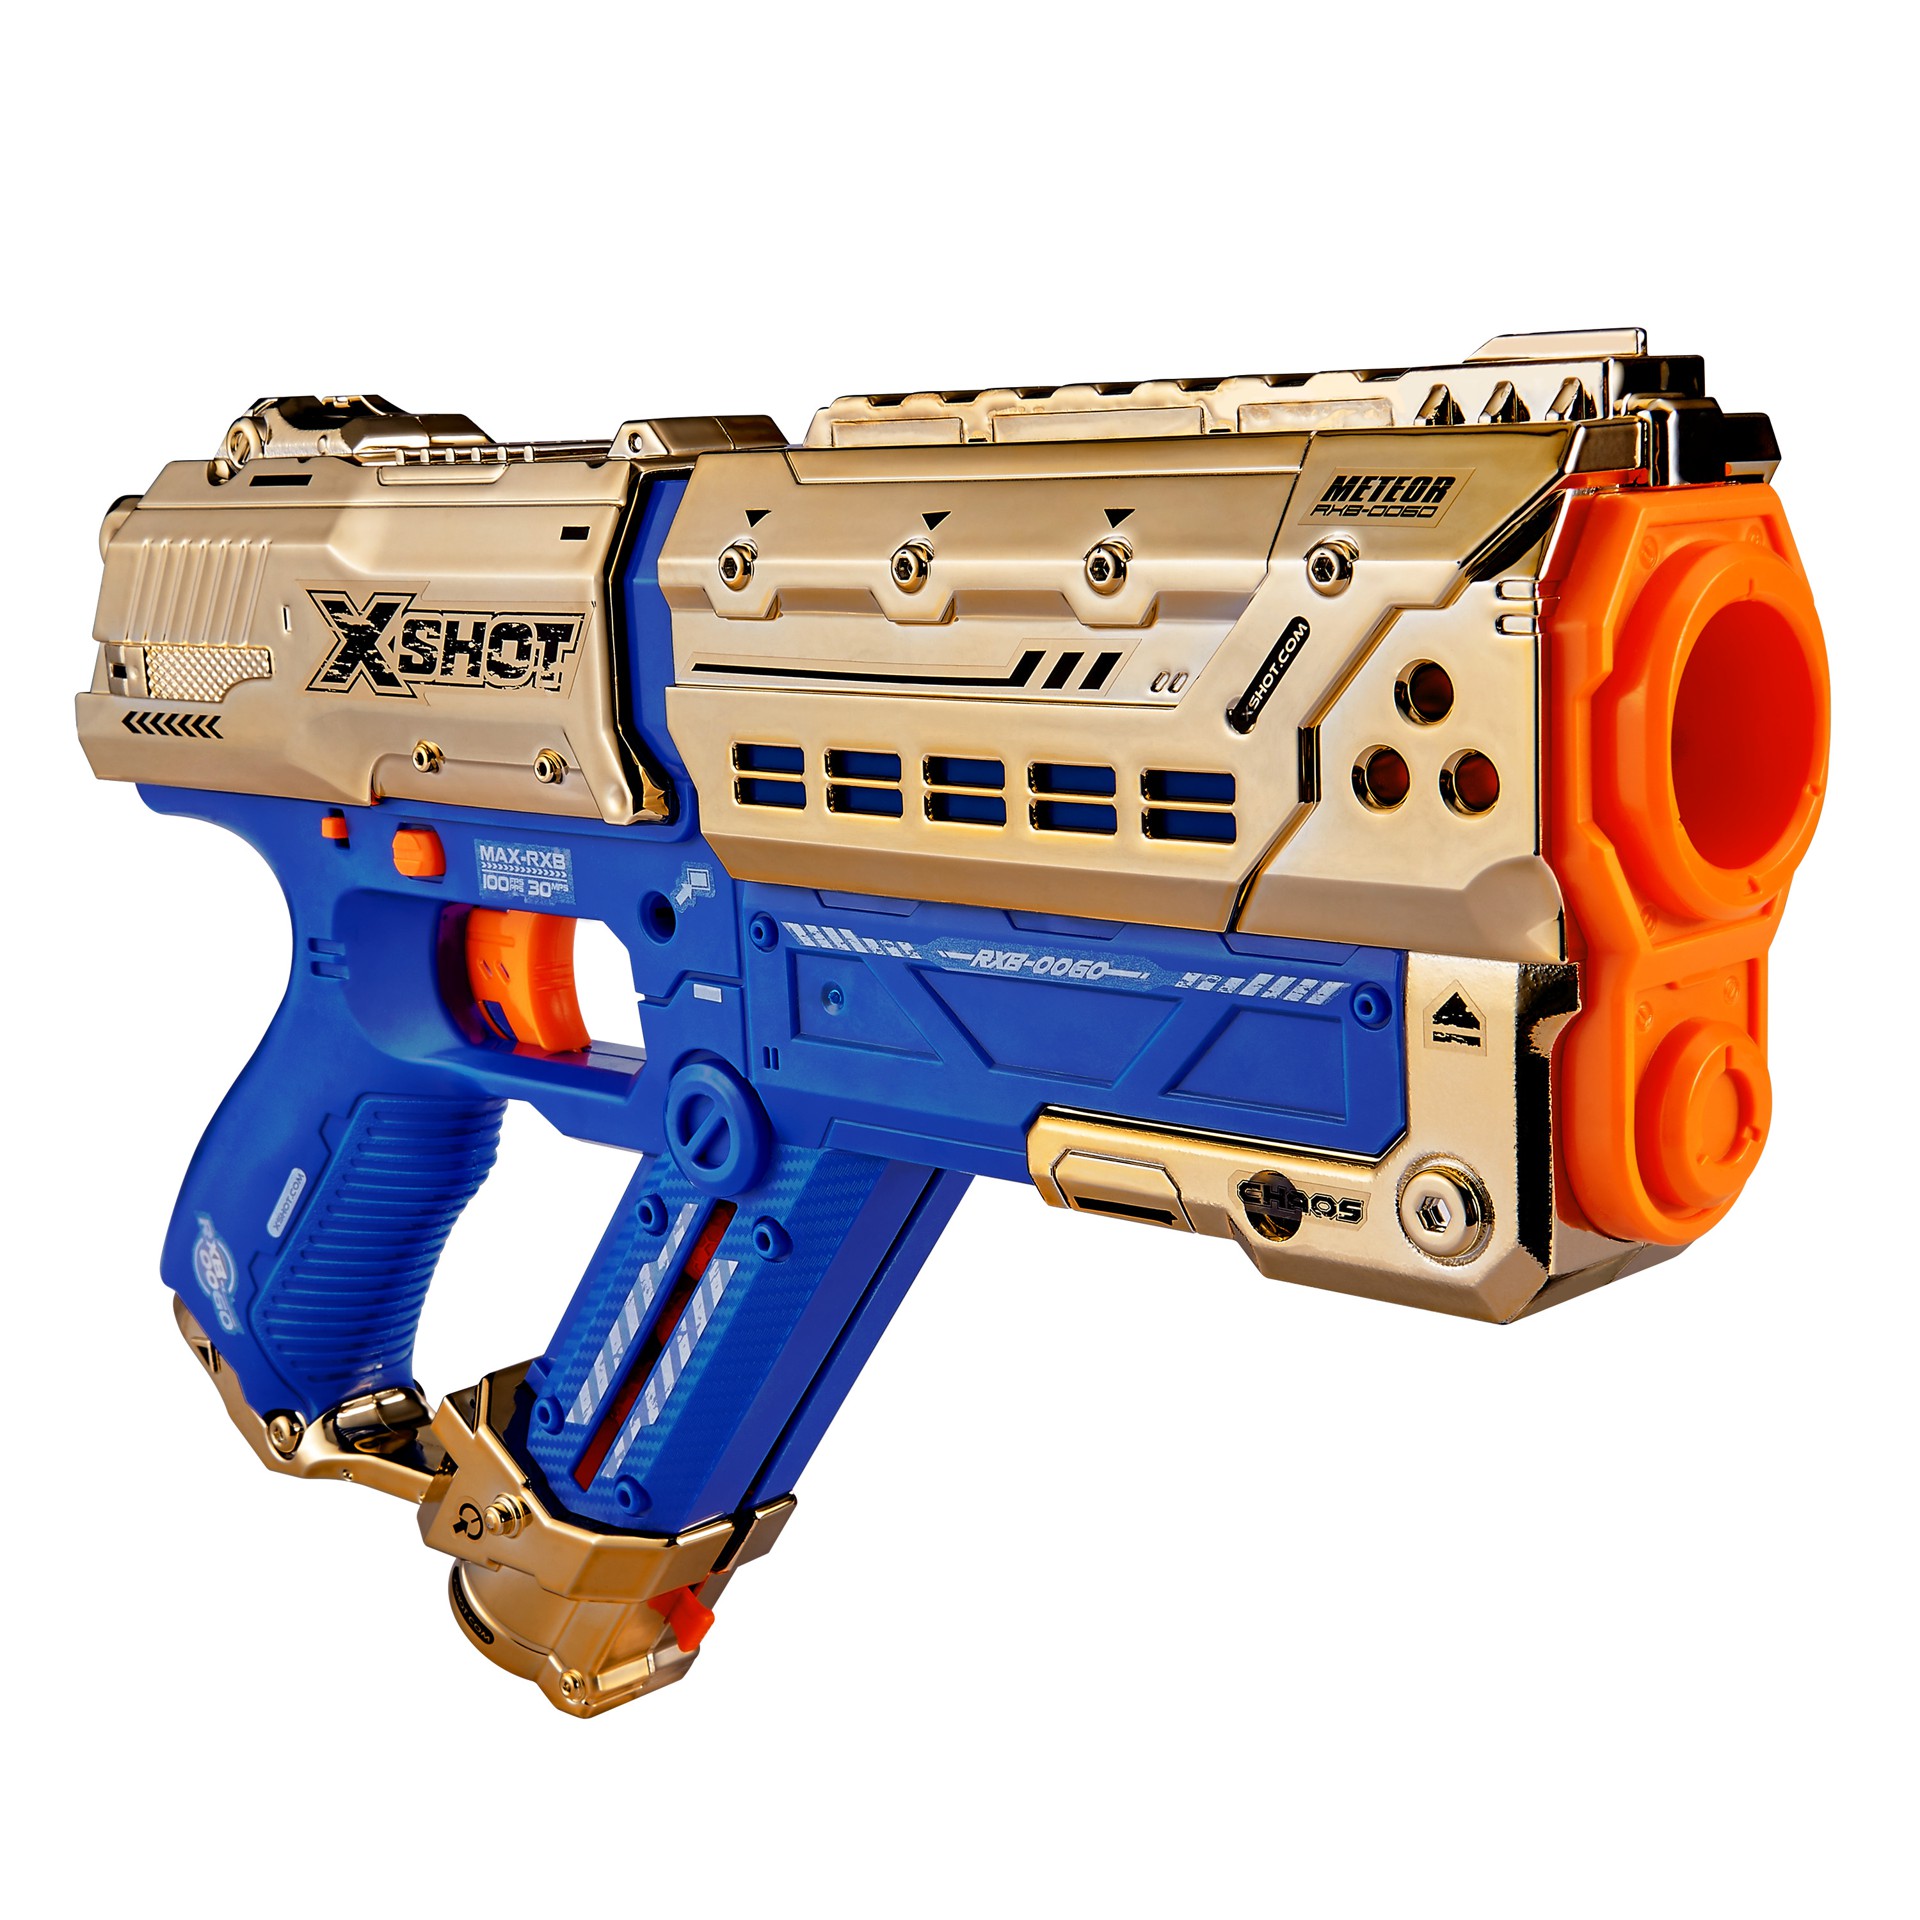 XShot Glitters in Gold with the Chaos Orbit & Meteor Blasters – Foam From  Above